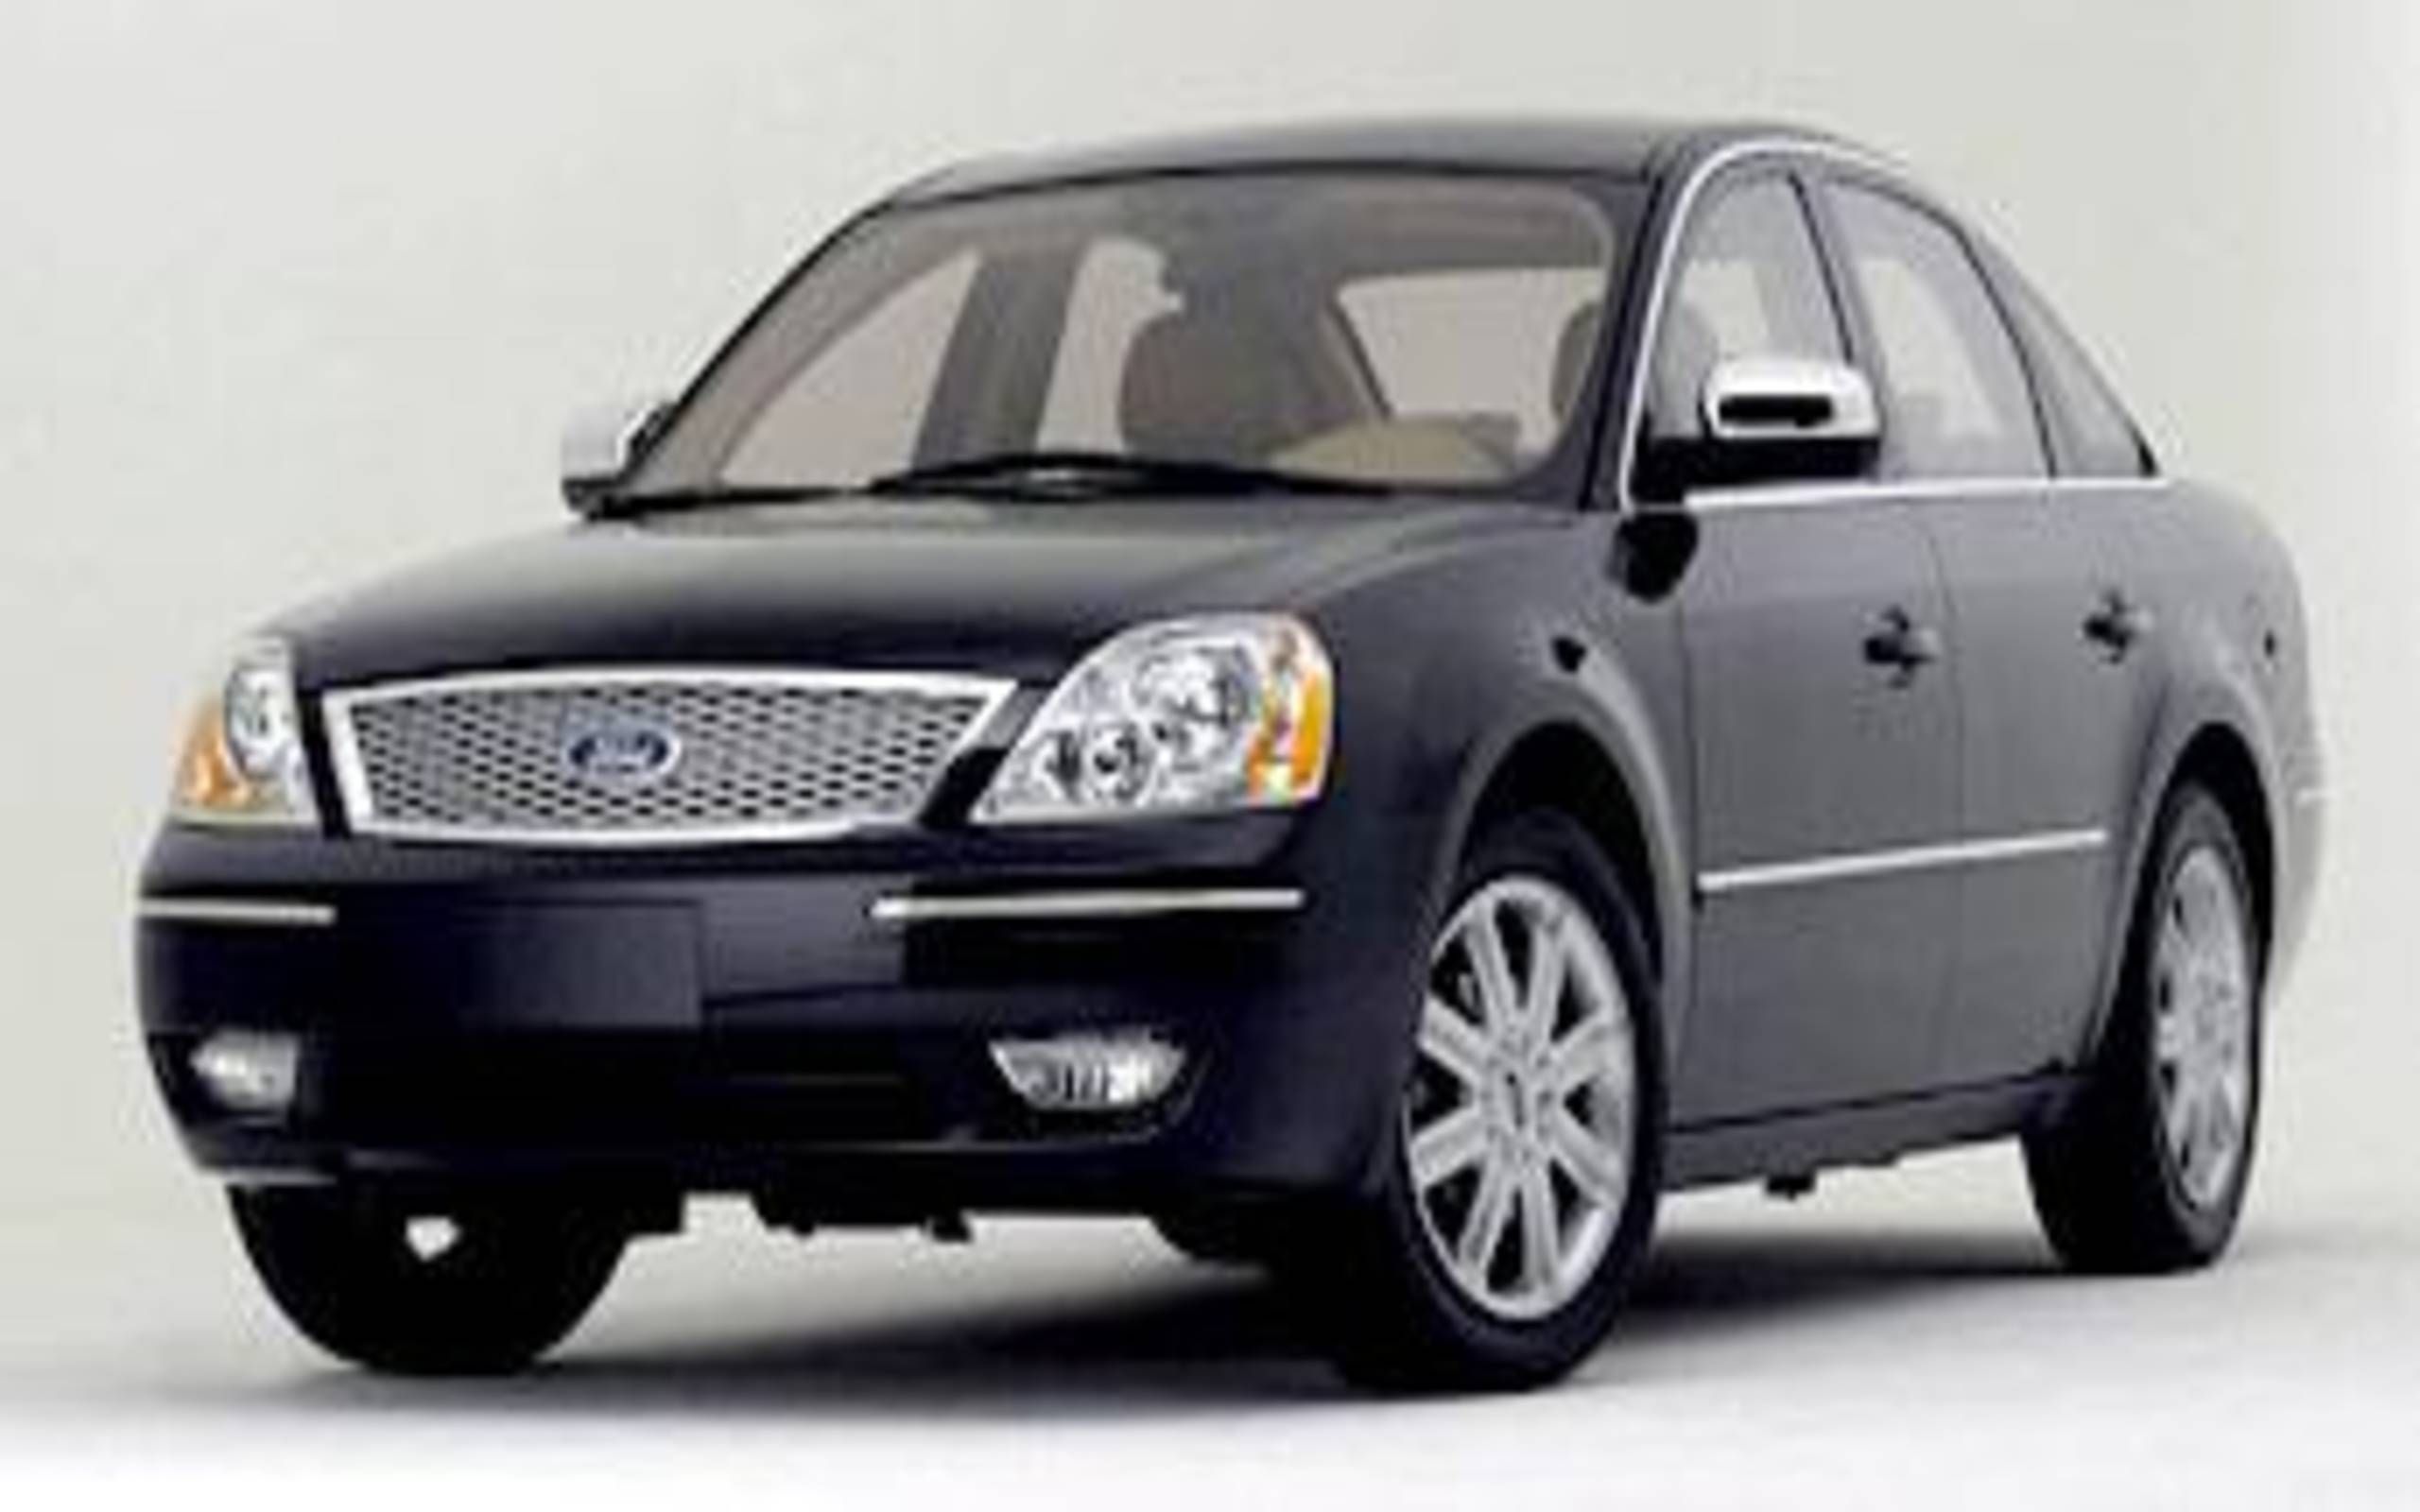 2005 Ford Five Hundred: The Five Hundred Spells Out The Future Of The Car  At Ford, Though Don't Say Bye To The Taurus